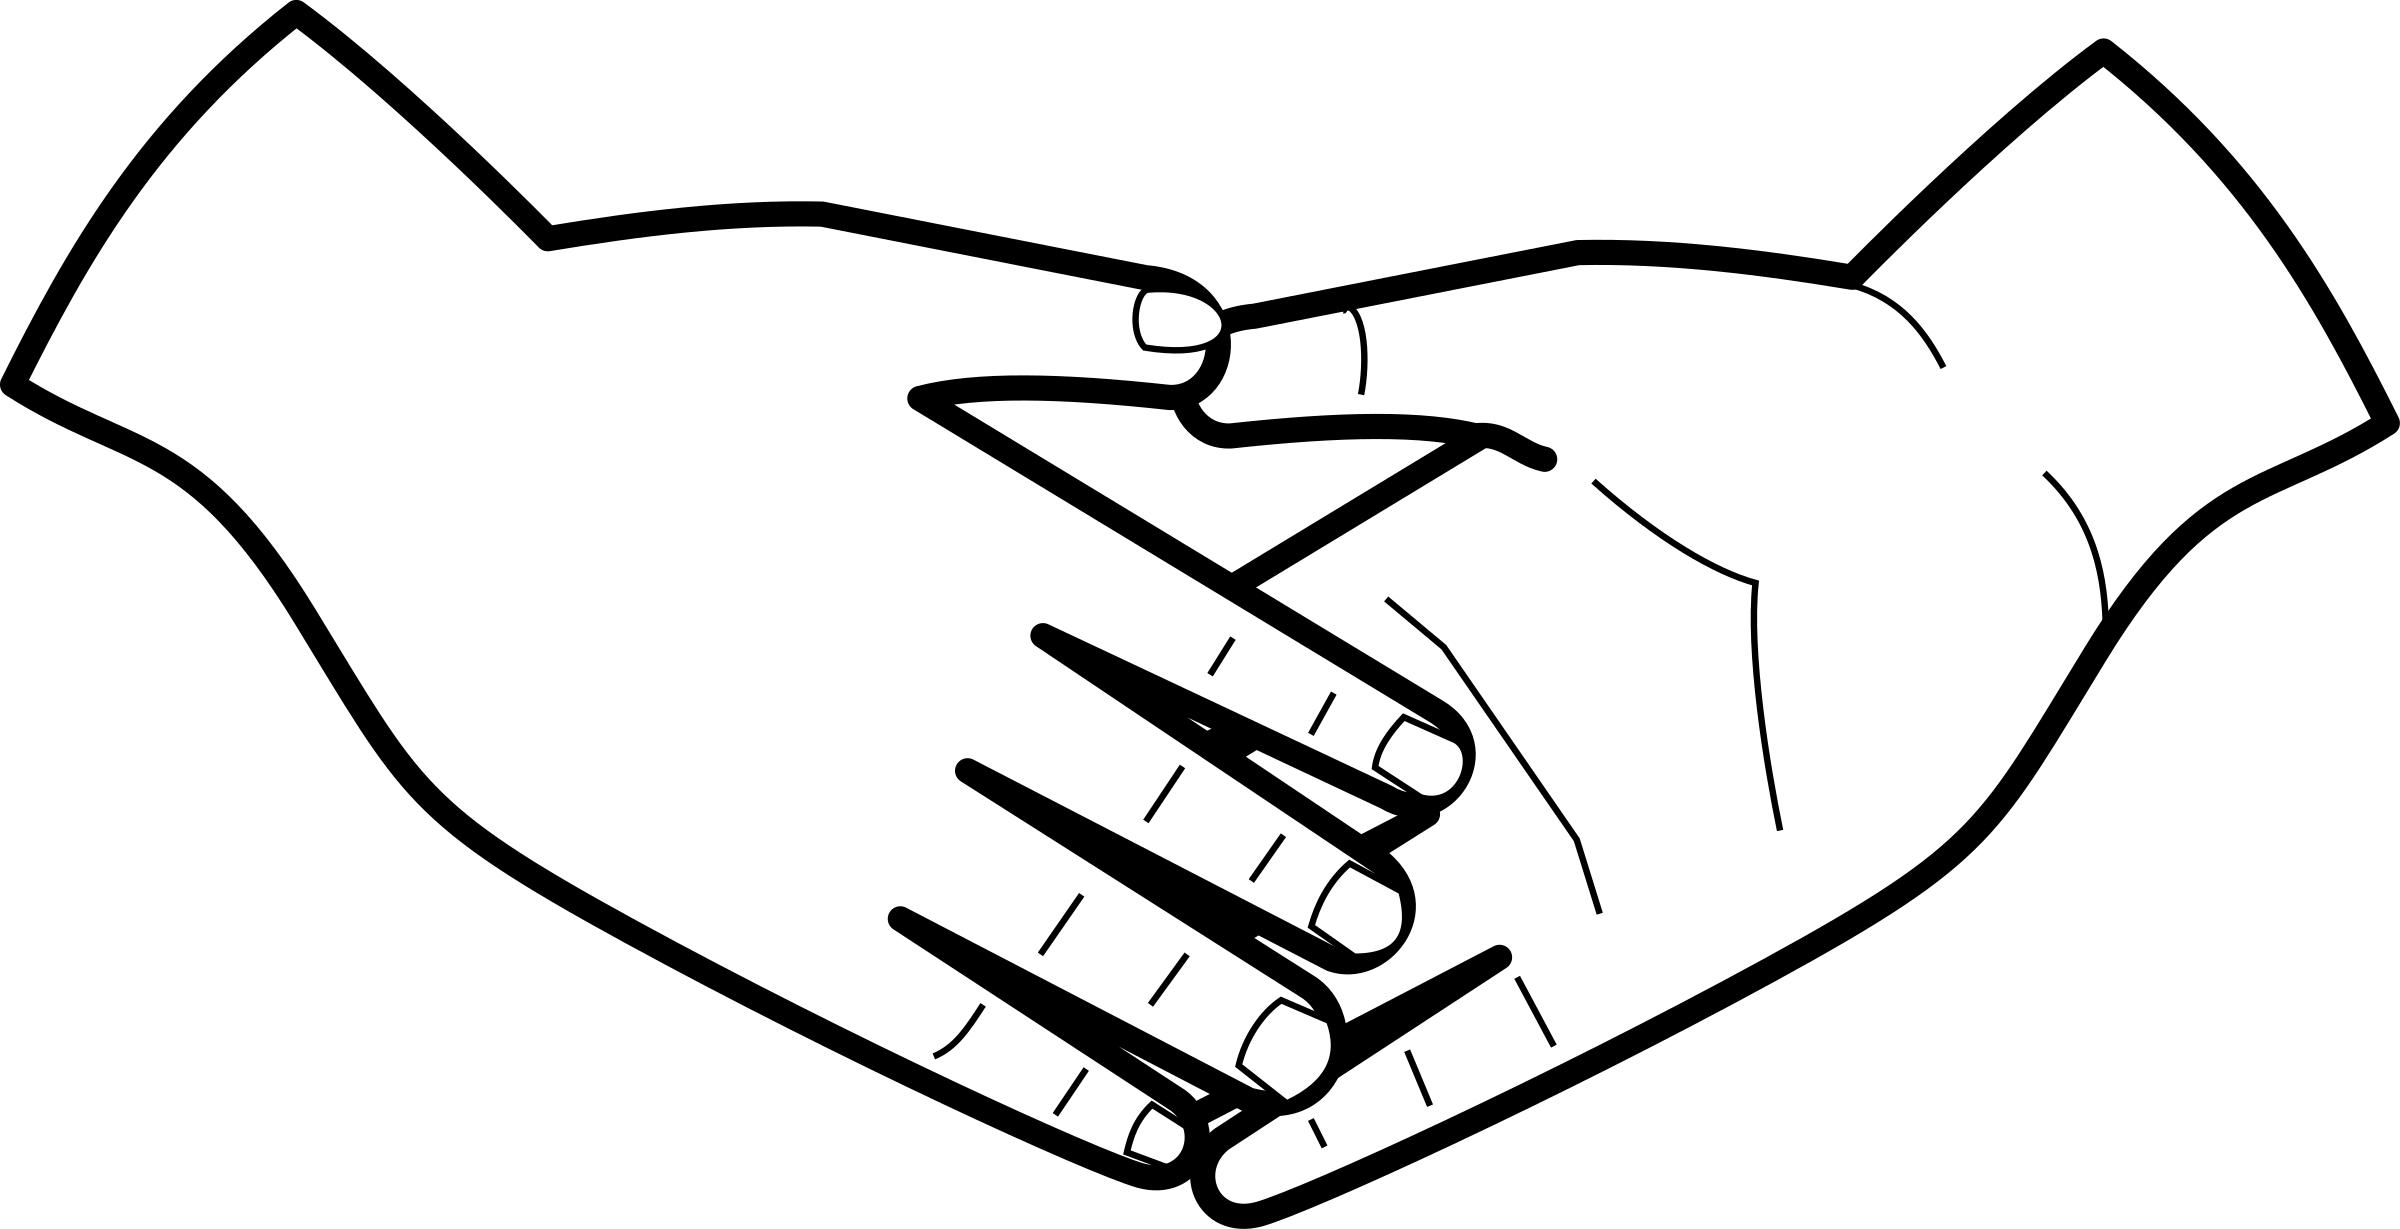 Shaking hands png